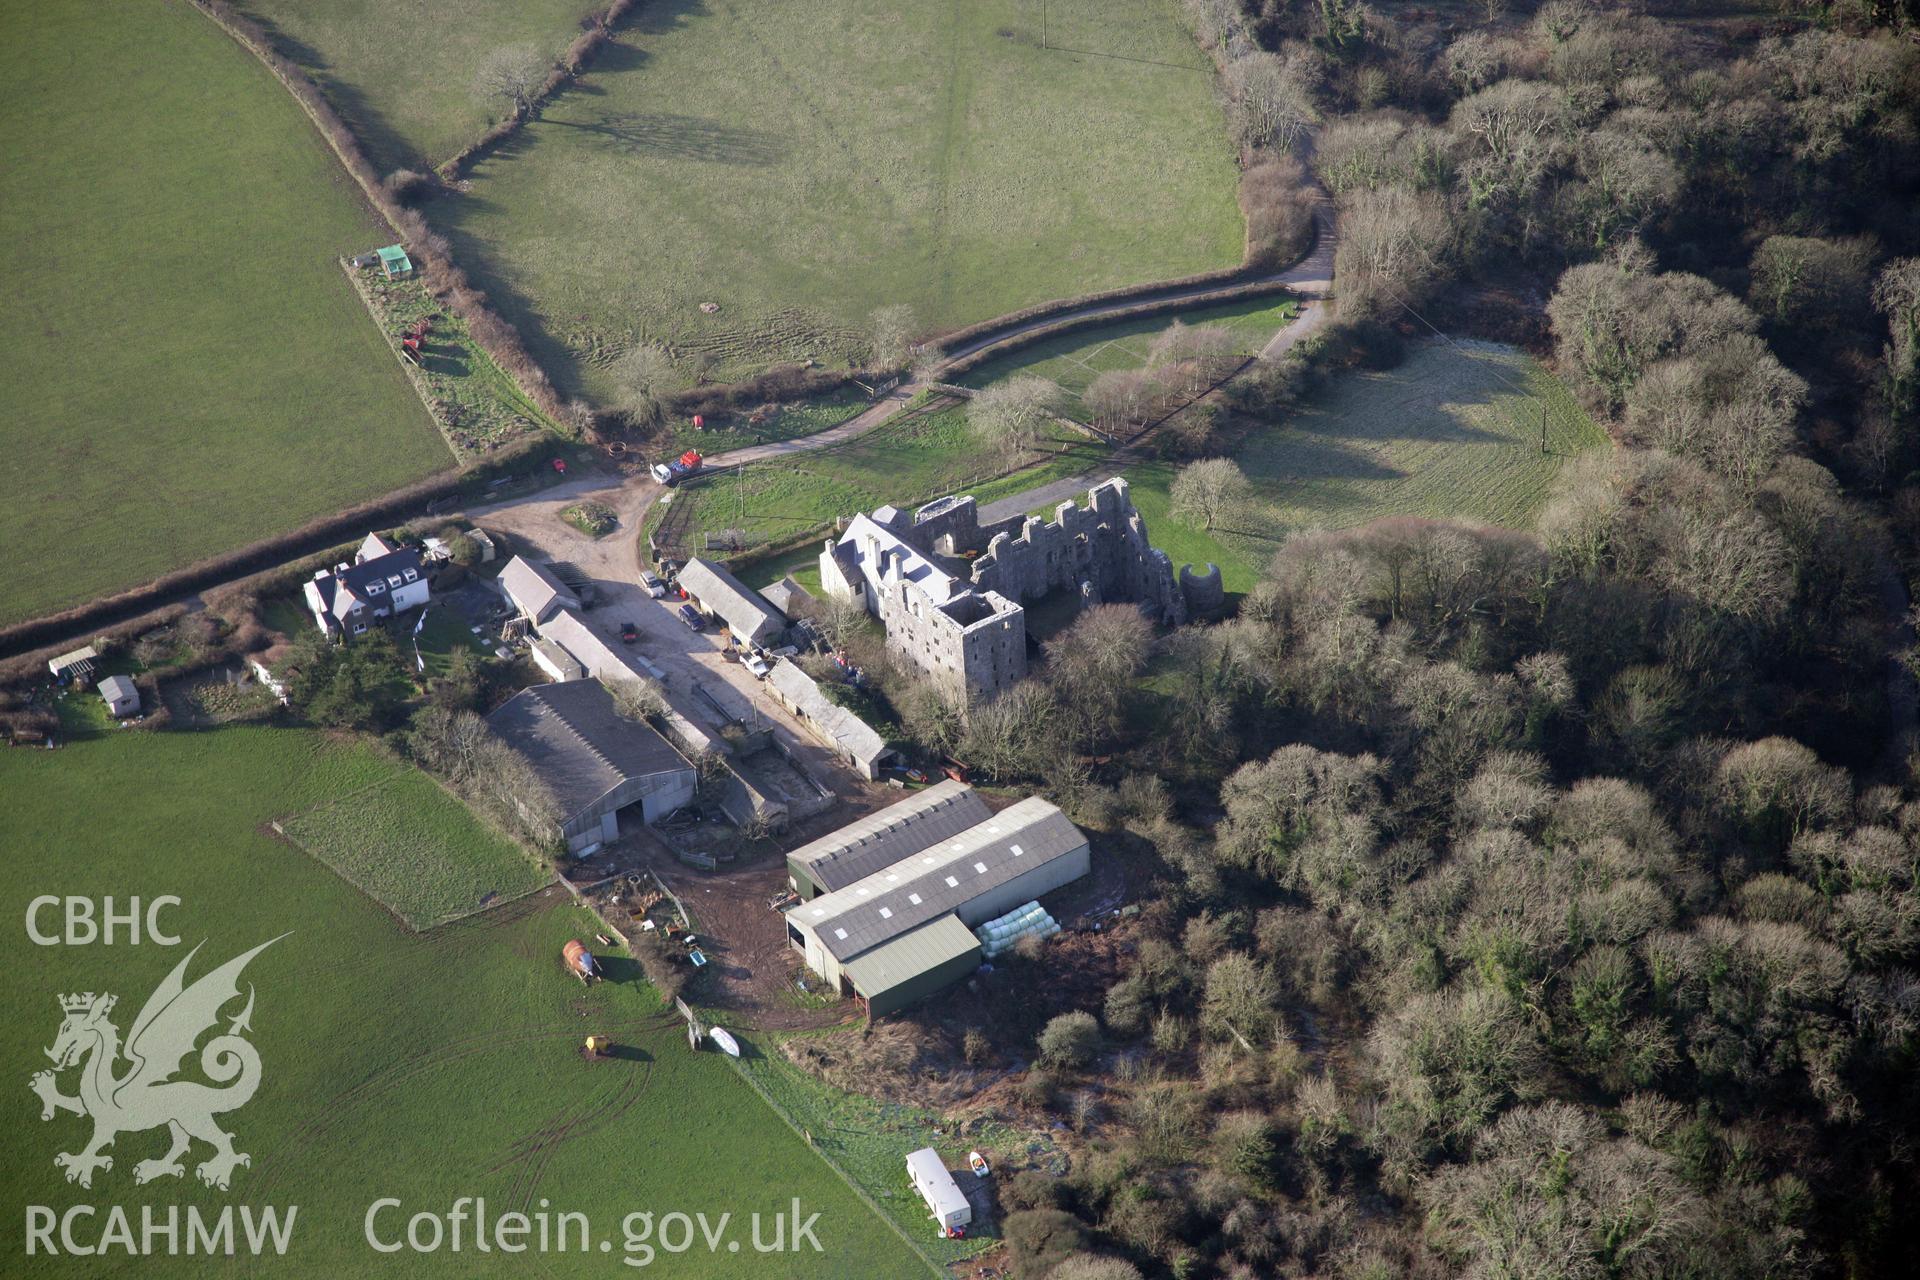 RCAHMW colour oblique photograph of Oxwich Castle. Taken by Toby Driver on 02/02/2012.